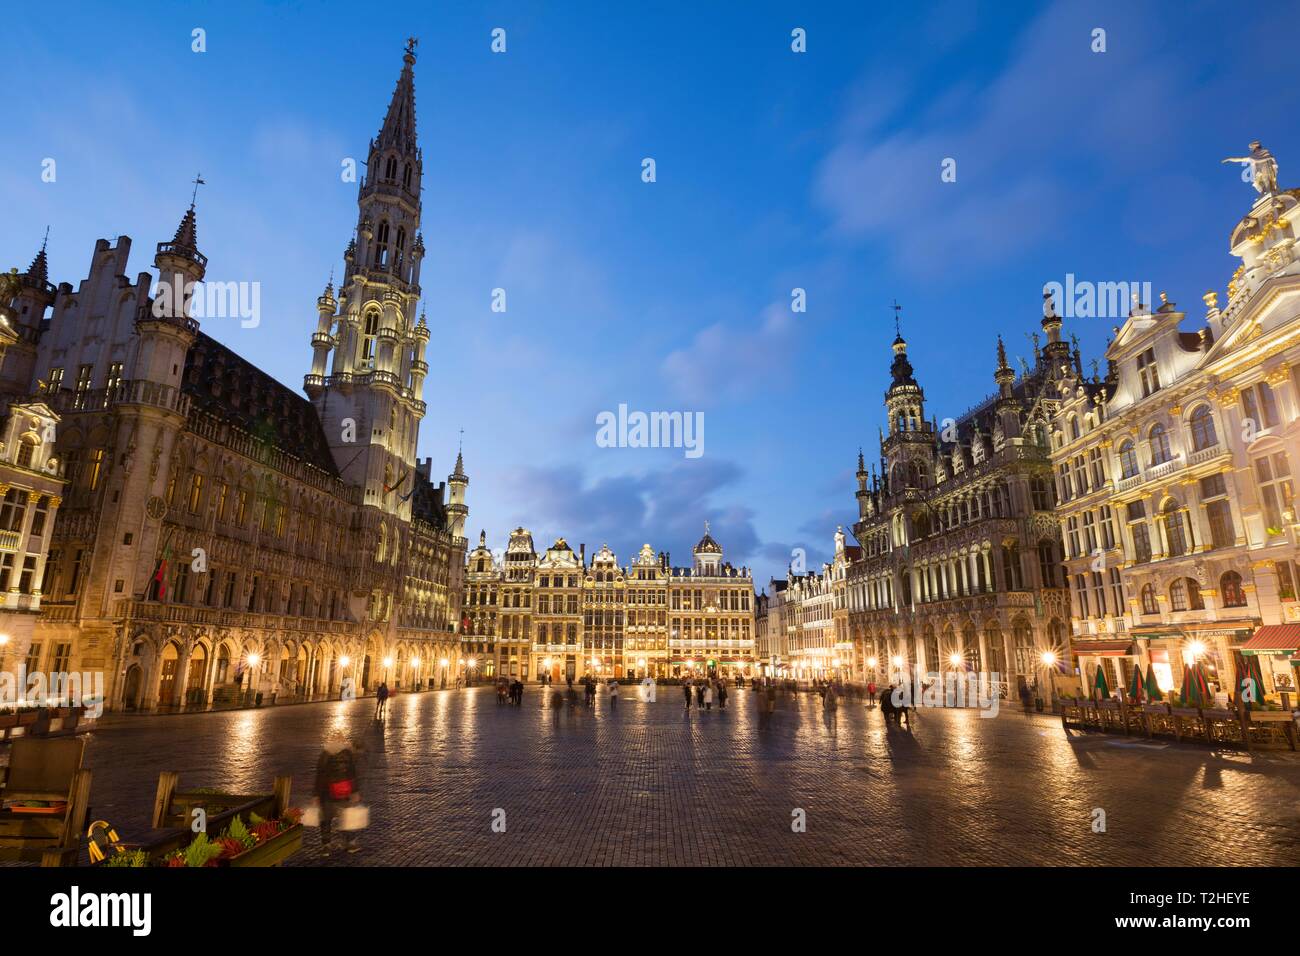 City Hall, Guild Houses and the Maison du Roi City Museum on Grand Place, Grote Markt, Dusk, Brussels, Belgium Stock Photo